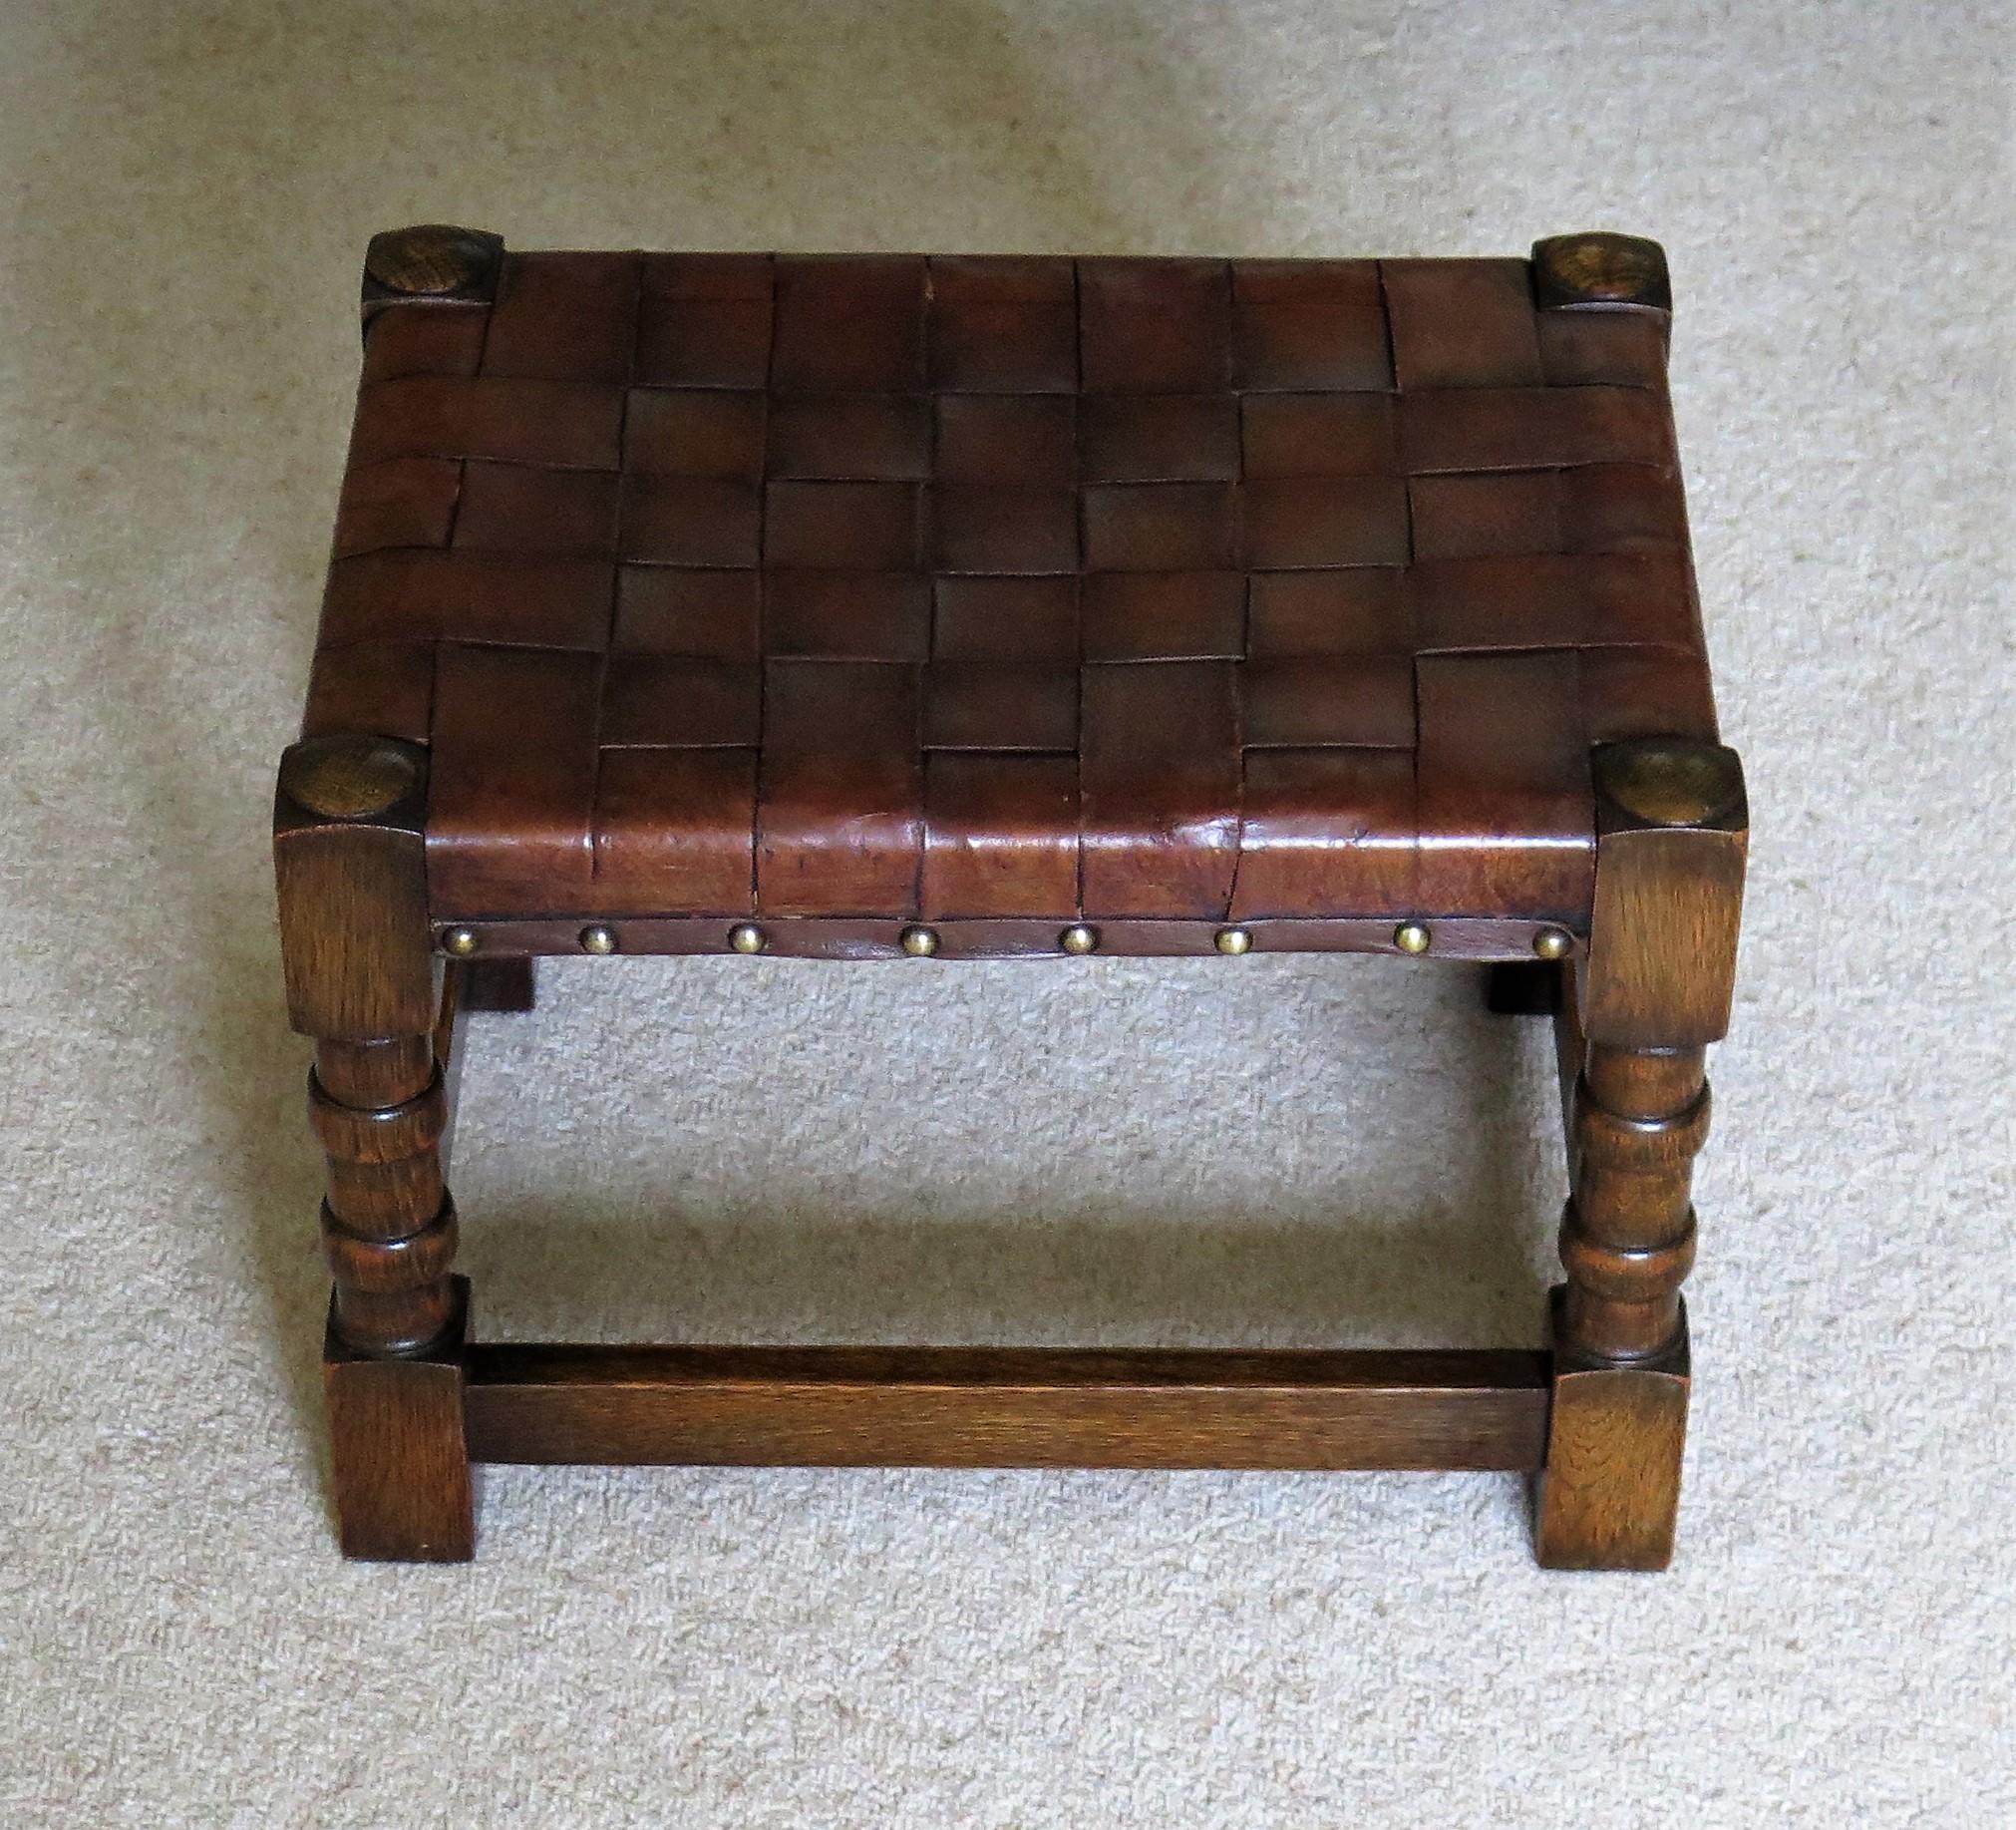 Handmade Oak Stool with Leather Strap Top, Arts & Crafts Late 19th Century For Sale 3